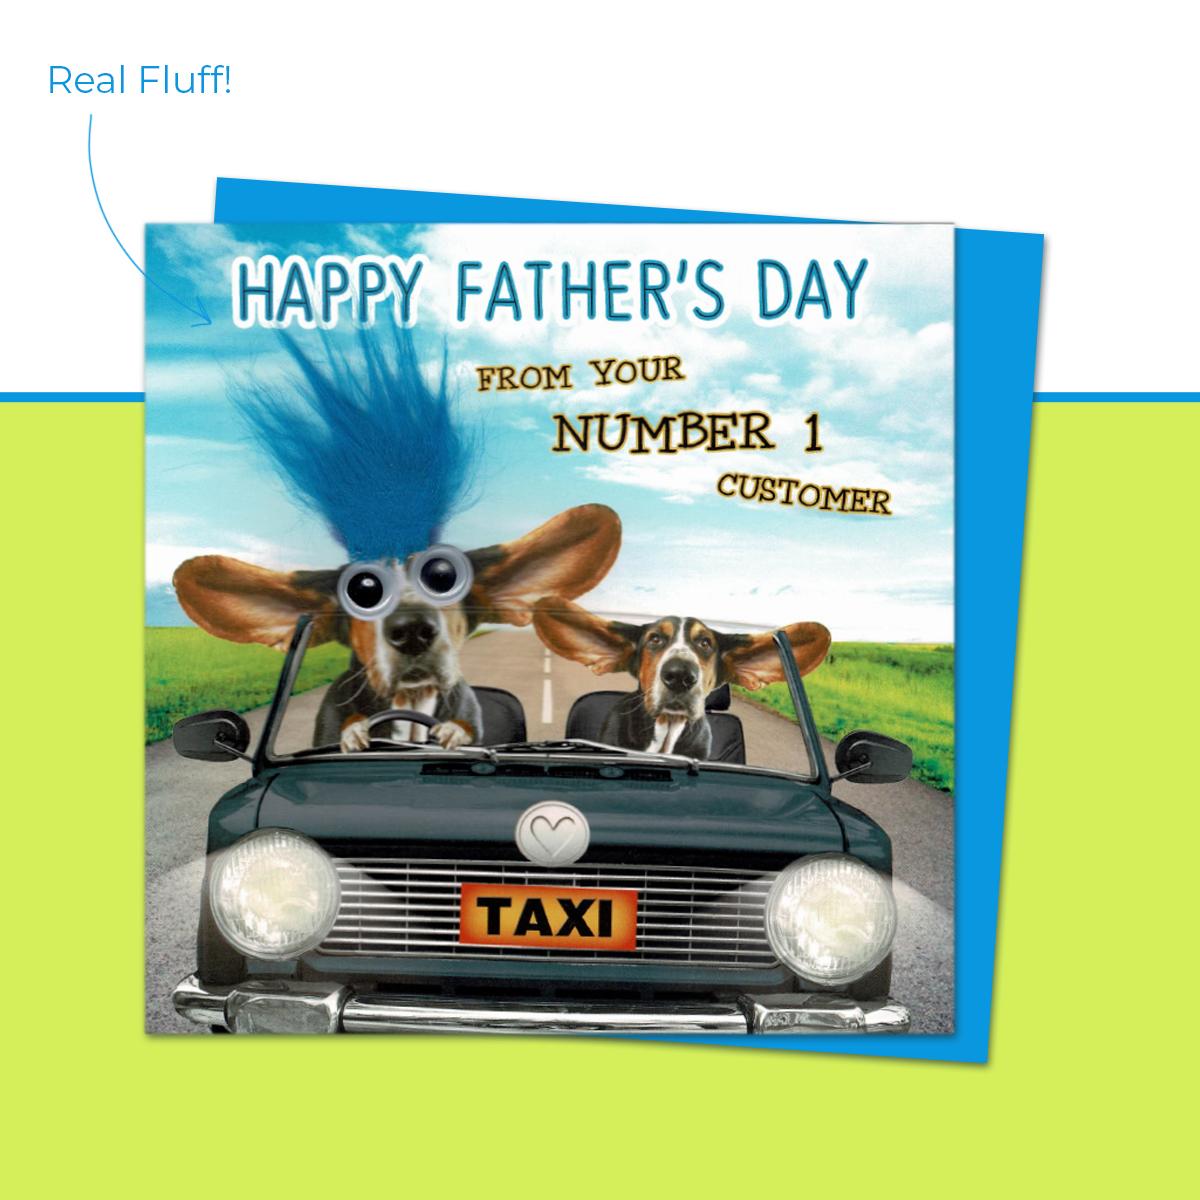 Happy Father's Day Taxi Driver Fluff Image